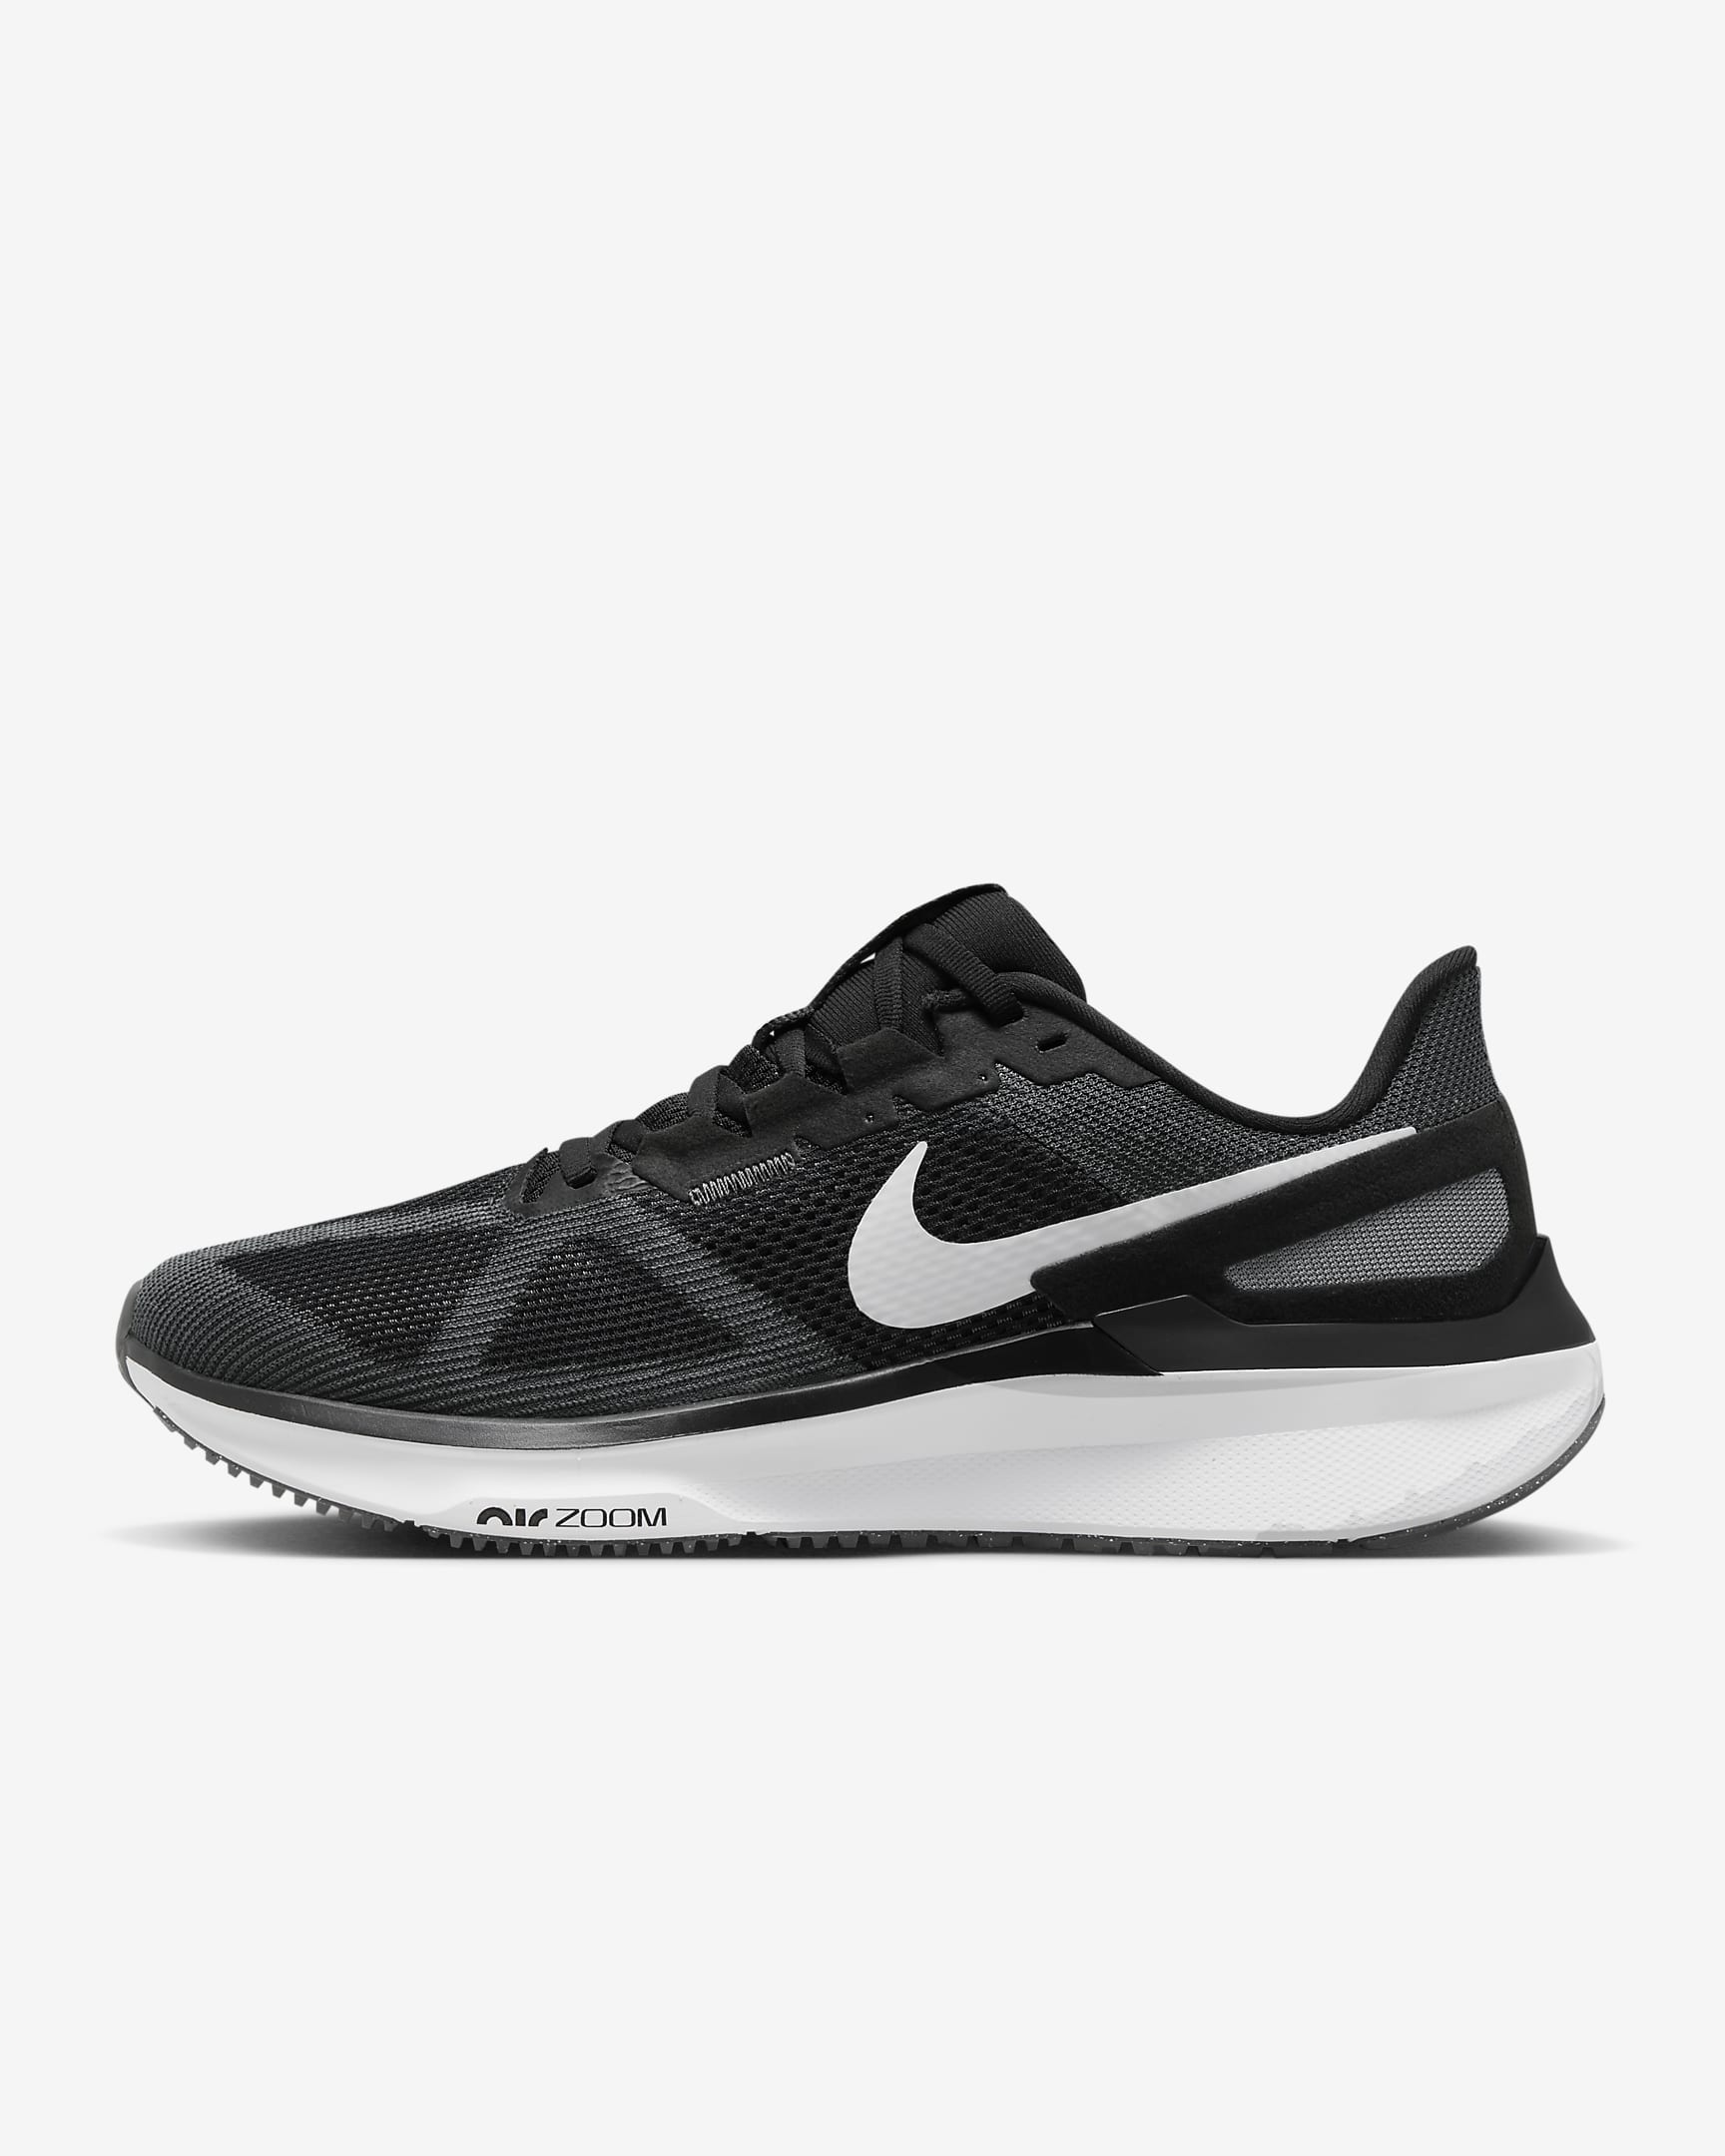 Nike Structure 25 Men's Road Running Shoes - Black/Iron Grey/White